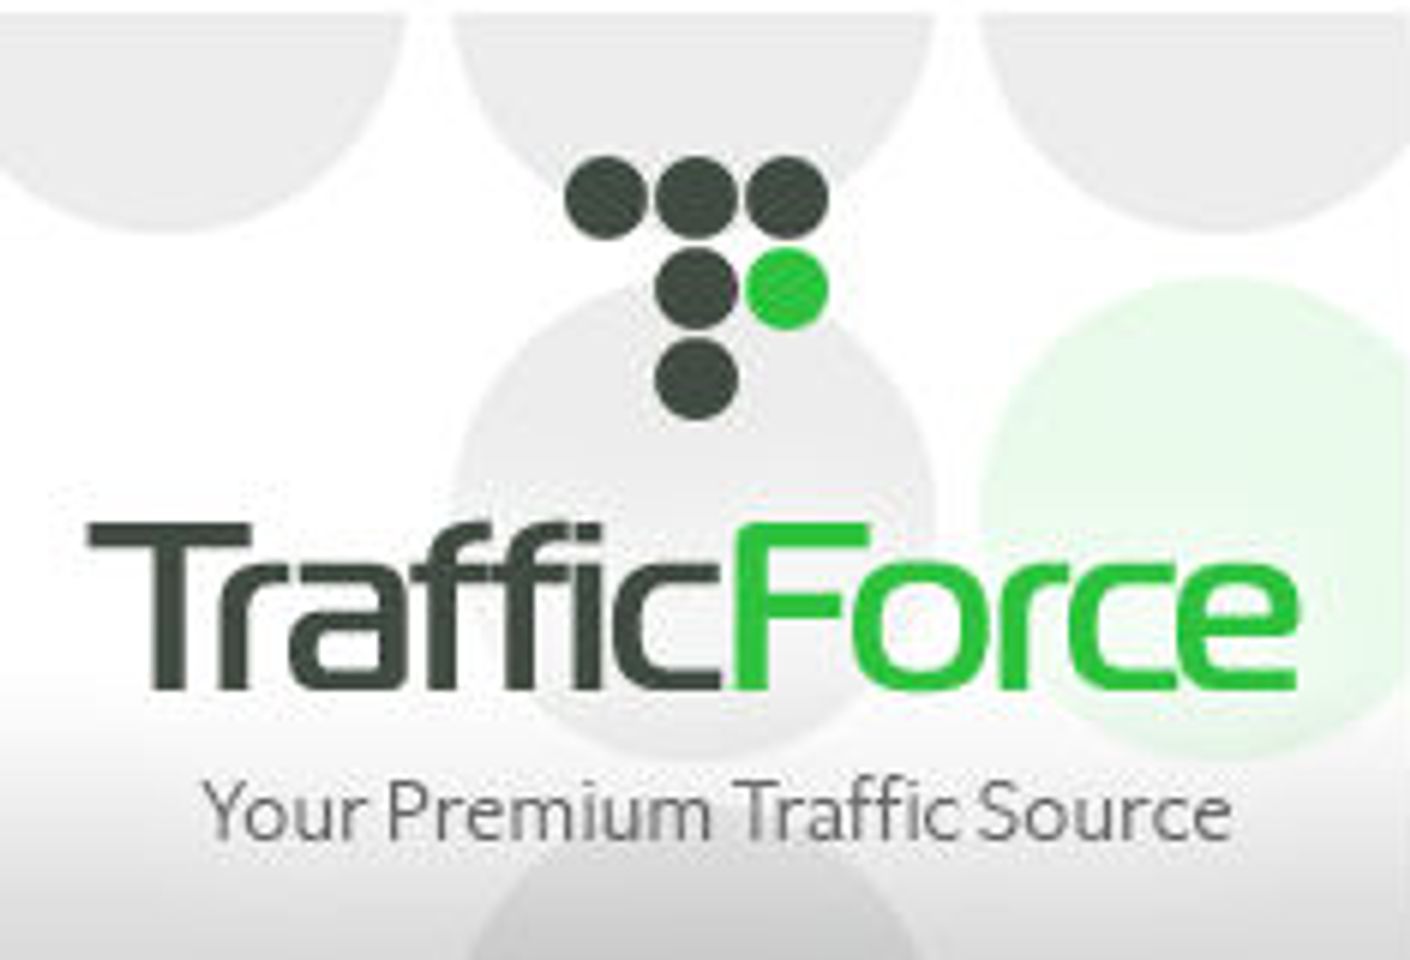 Traffic Force Carrier Offers Targeting and Advanced Mobile Tracking